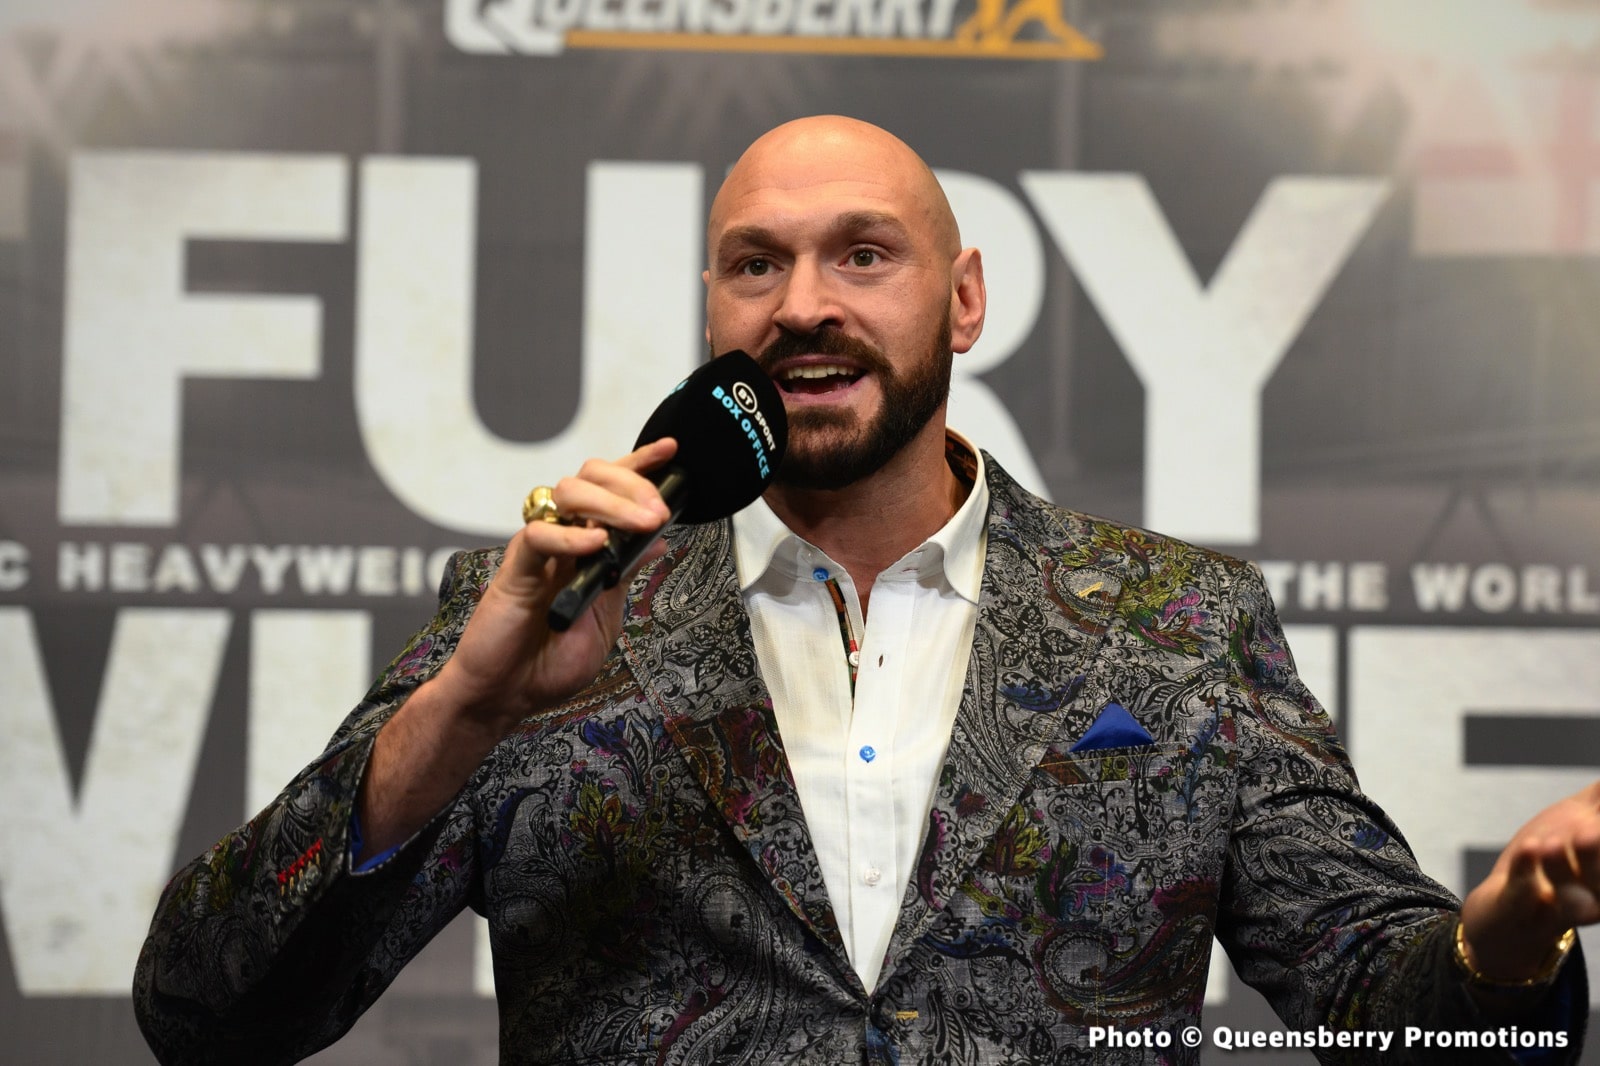 Image: Dillian Whyte can't avoid Tyson Fury says Sugarhill